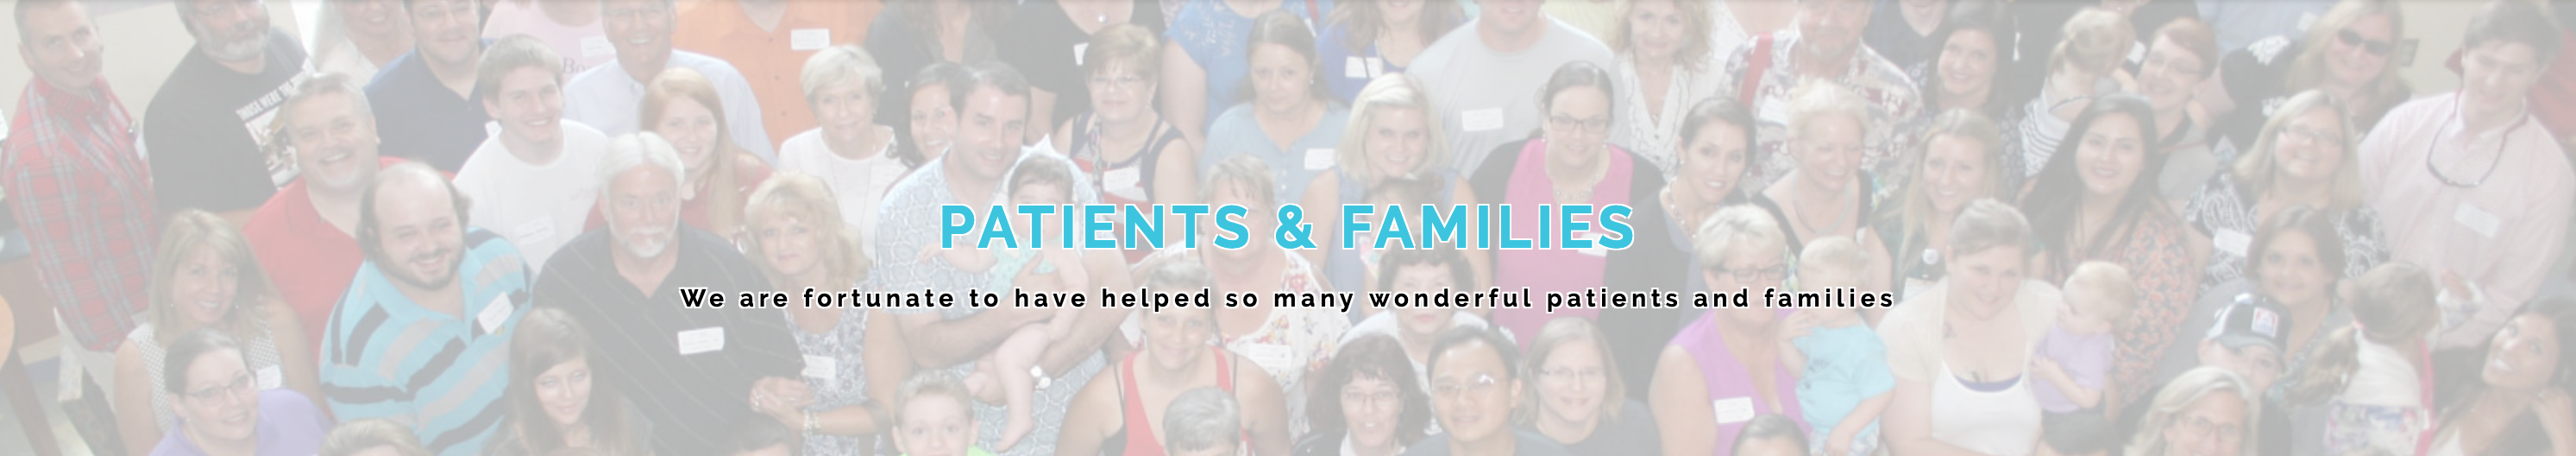 Patient and Families Header